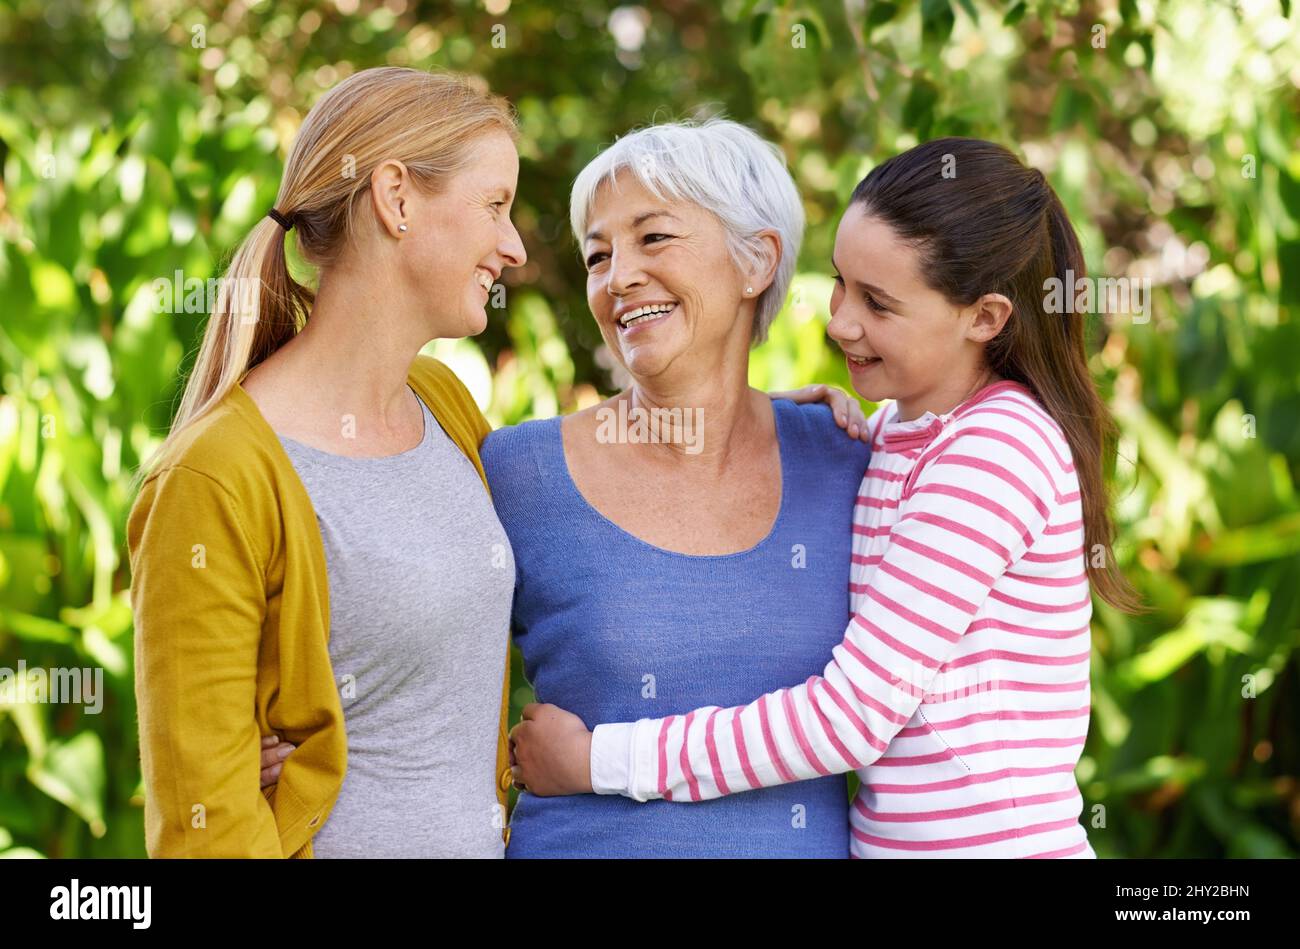 Bonding with loved ones. Shot of three generations of family women standing outdoors. Stock Photo